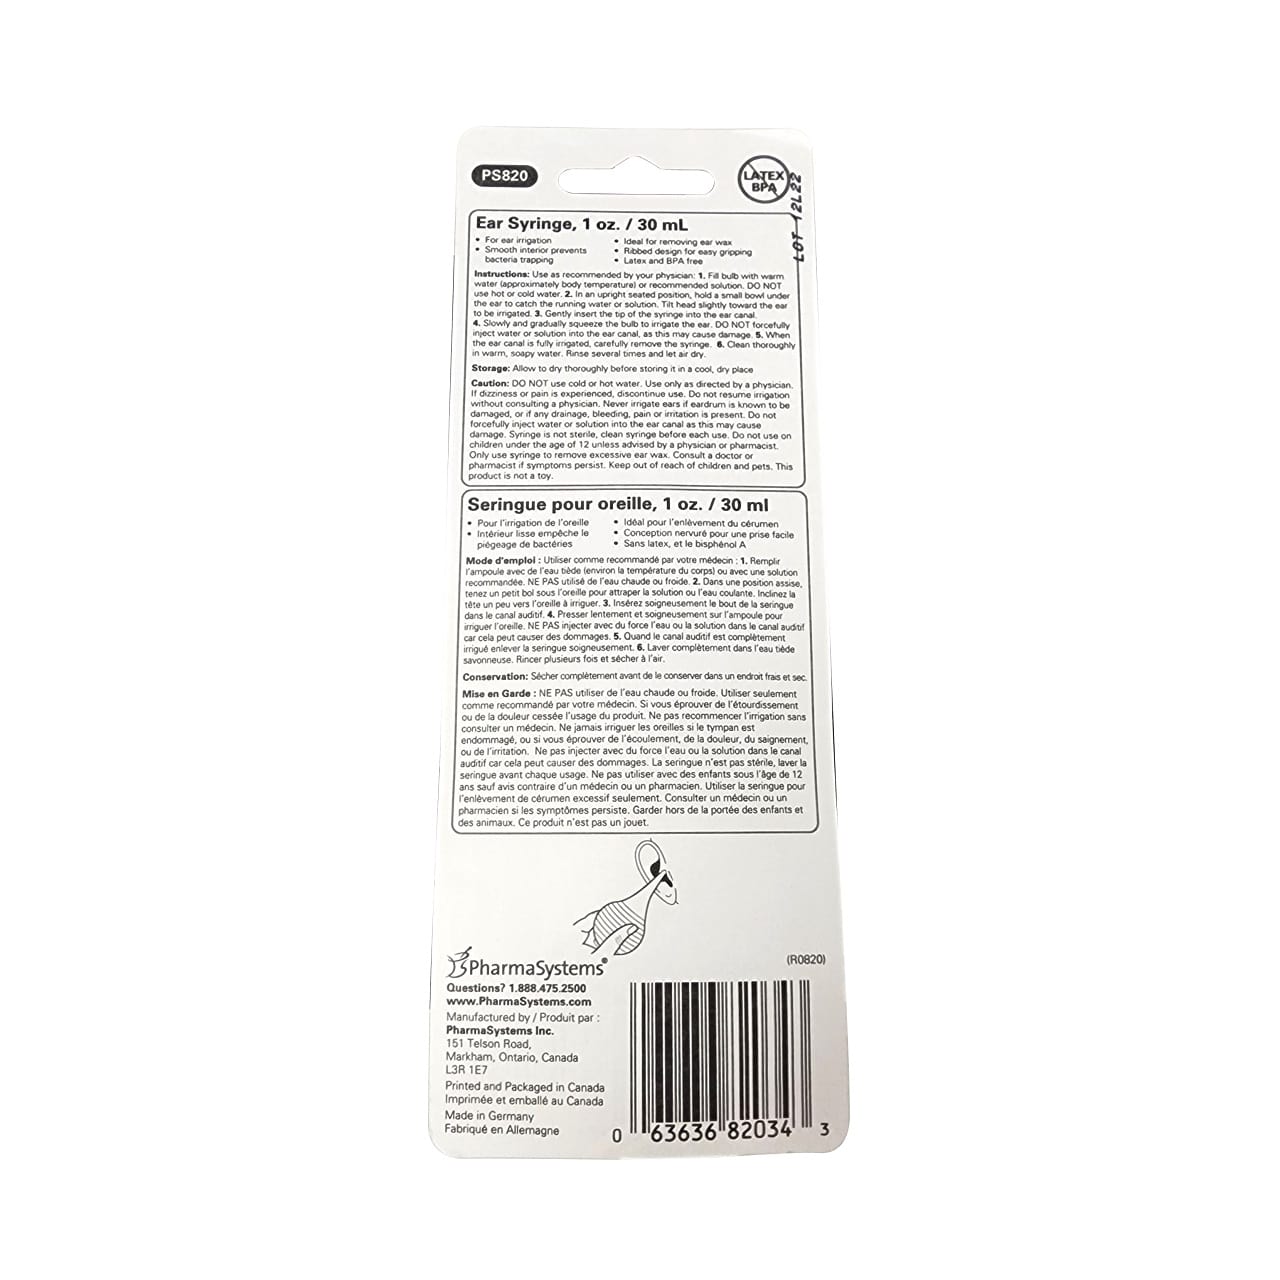 Instructions and cautions for PharmaSystems Ear Syringe (1 ounce)